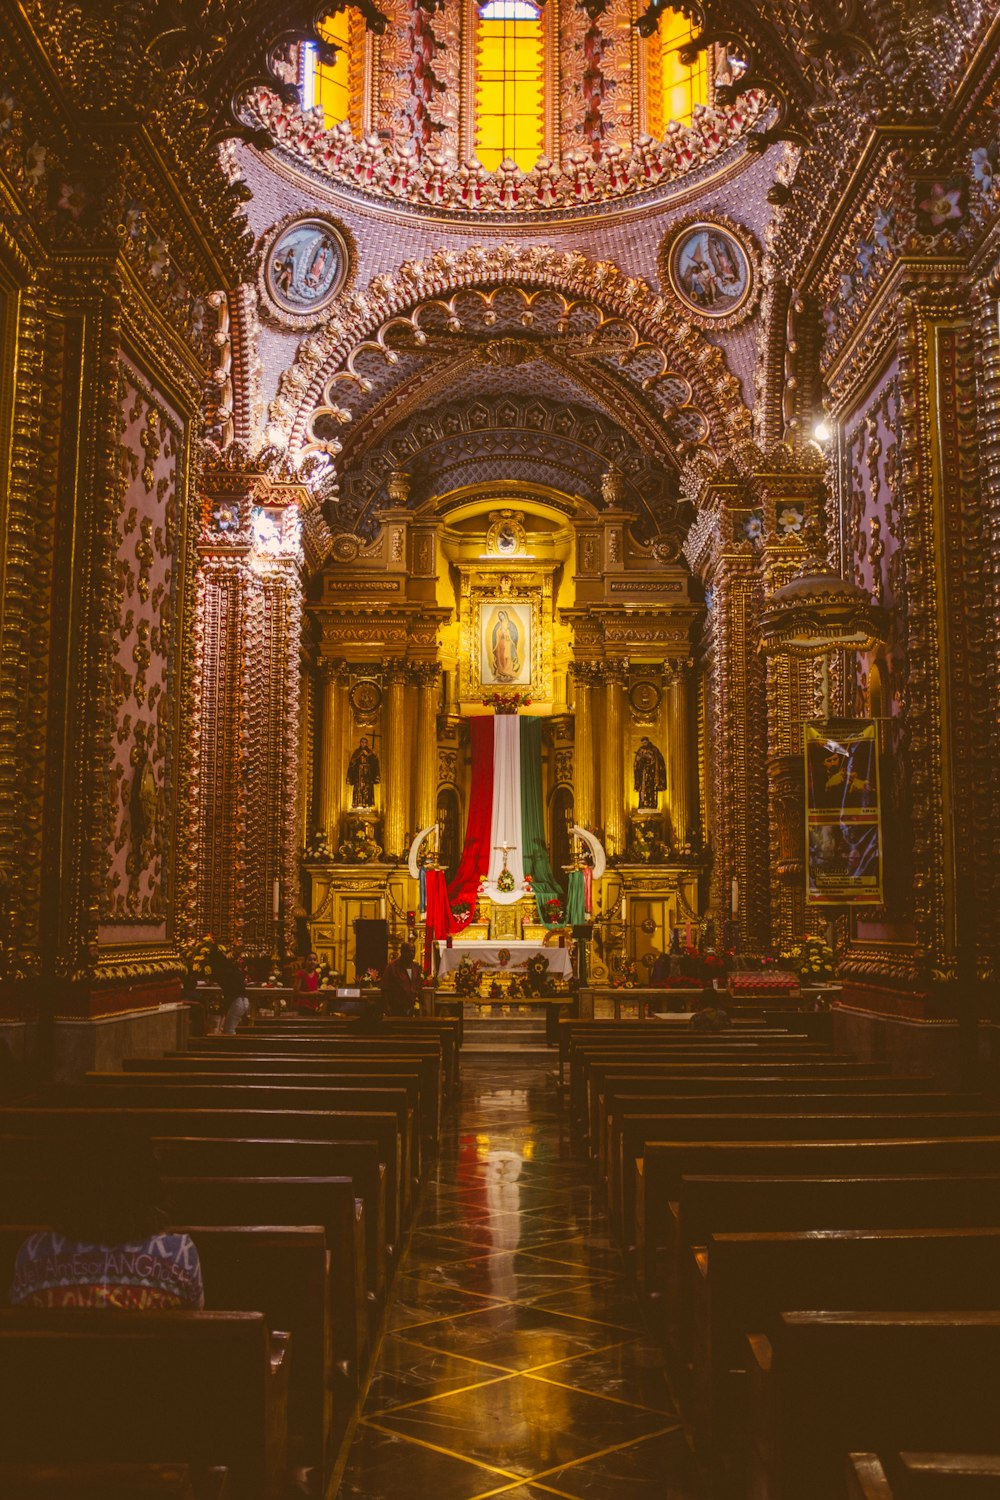 the interior of a church with gold and red decorations